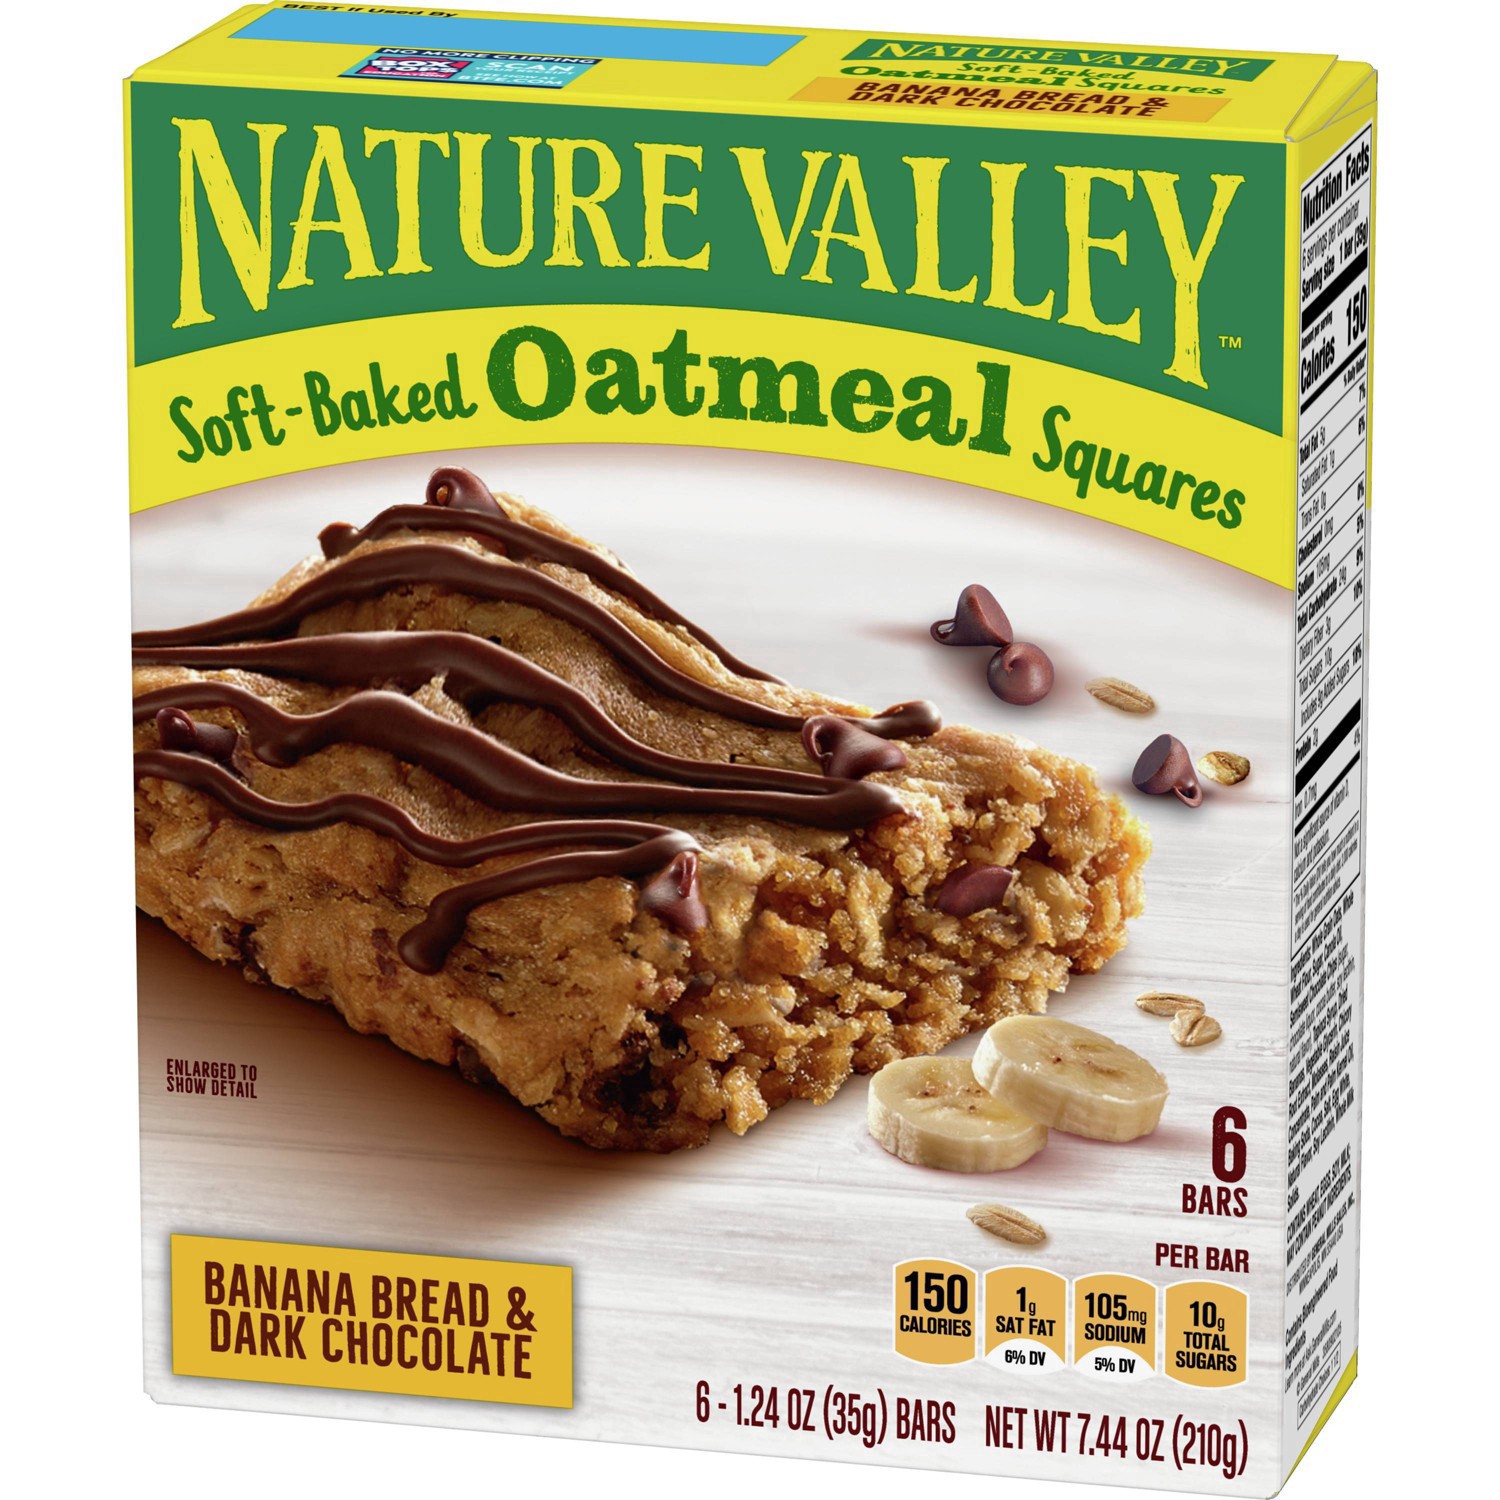 slide 95 of 101, Nature Valley Soft-Baked Oatmeal Squares, Banana Bread & Dark Chocolate, 6 ct, 6 ct